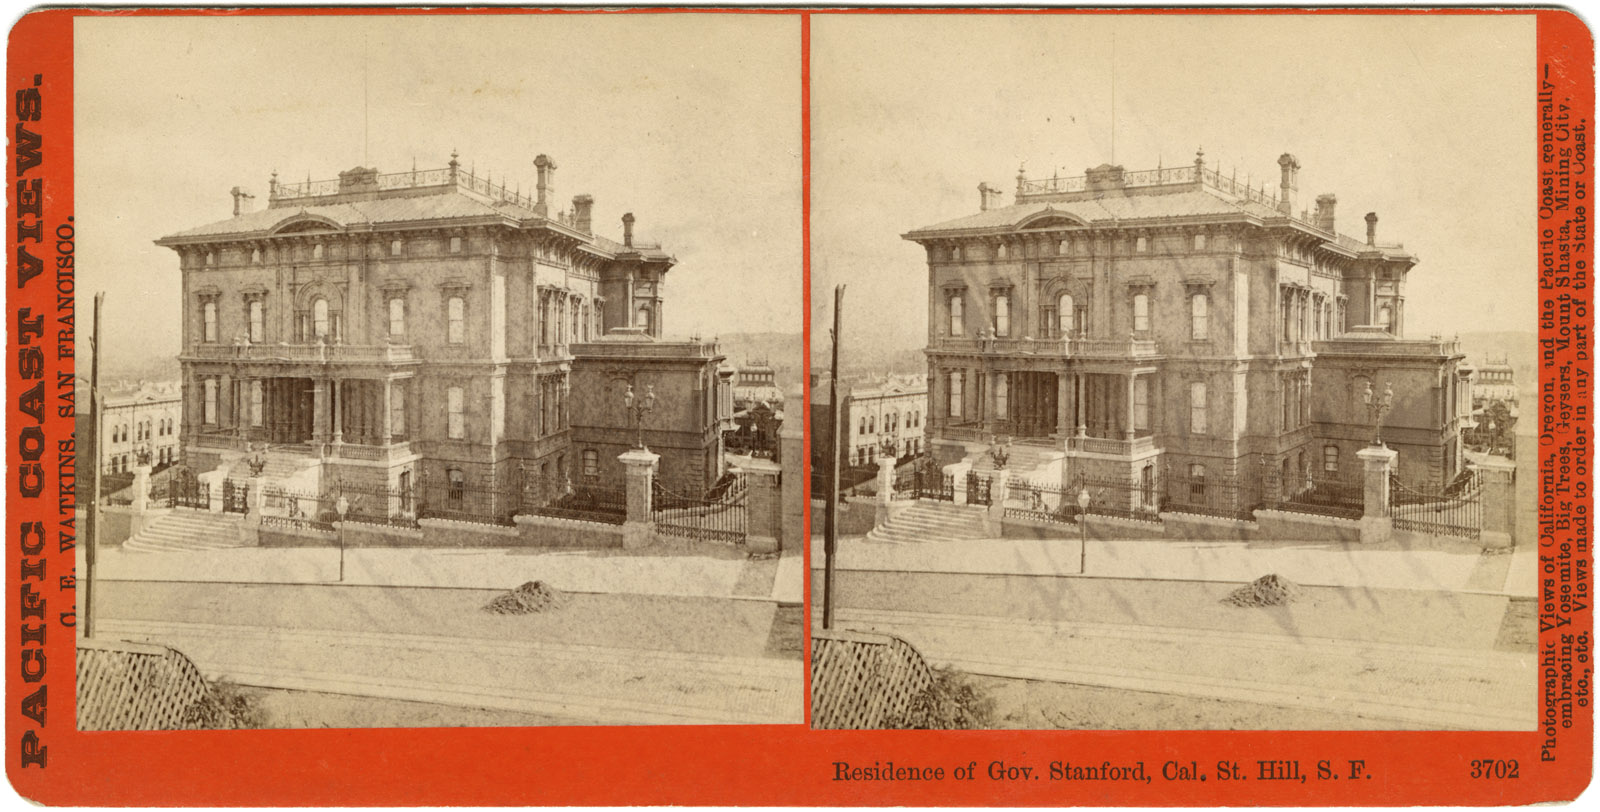 Watkins #3702 - Residence of Gov. Stanford, Cal. St. Hill, S.F.